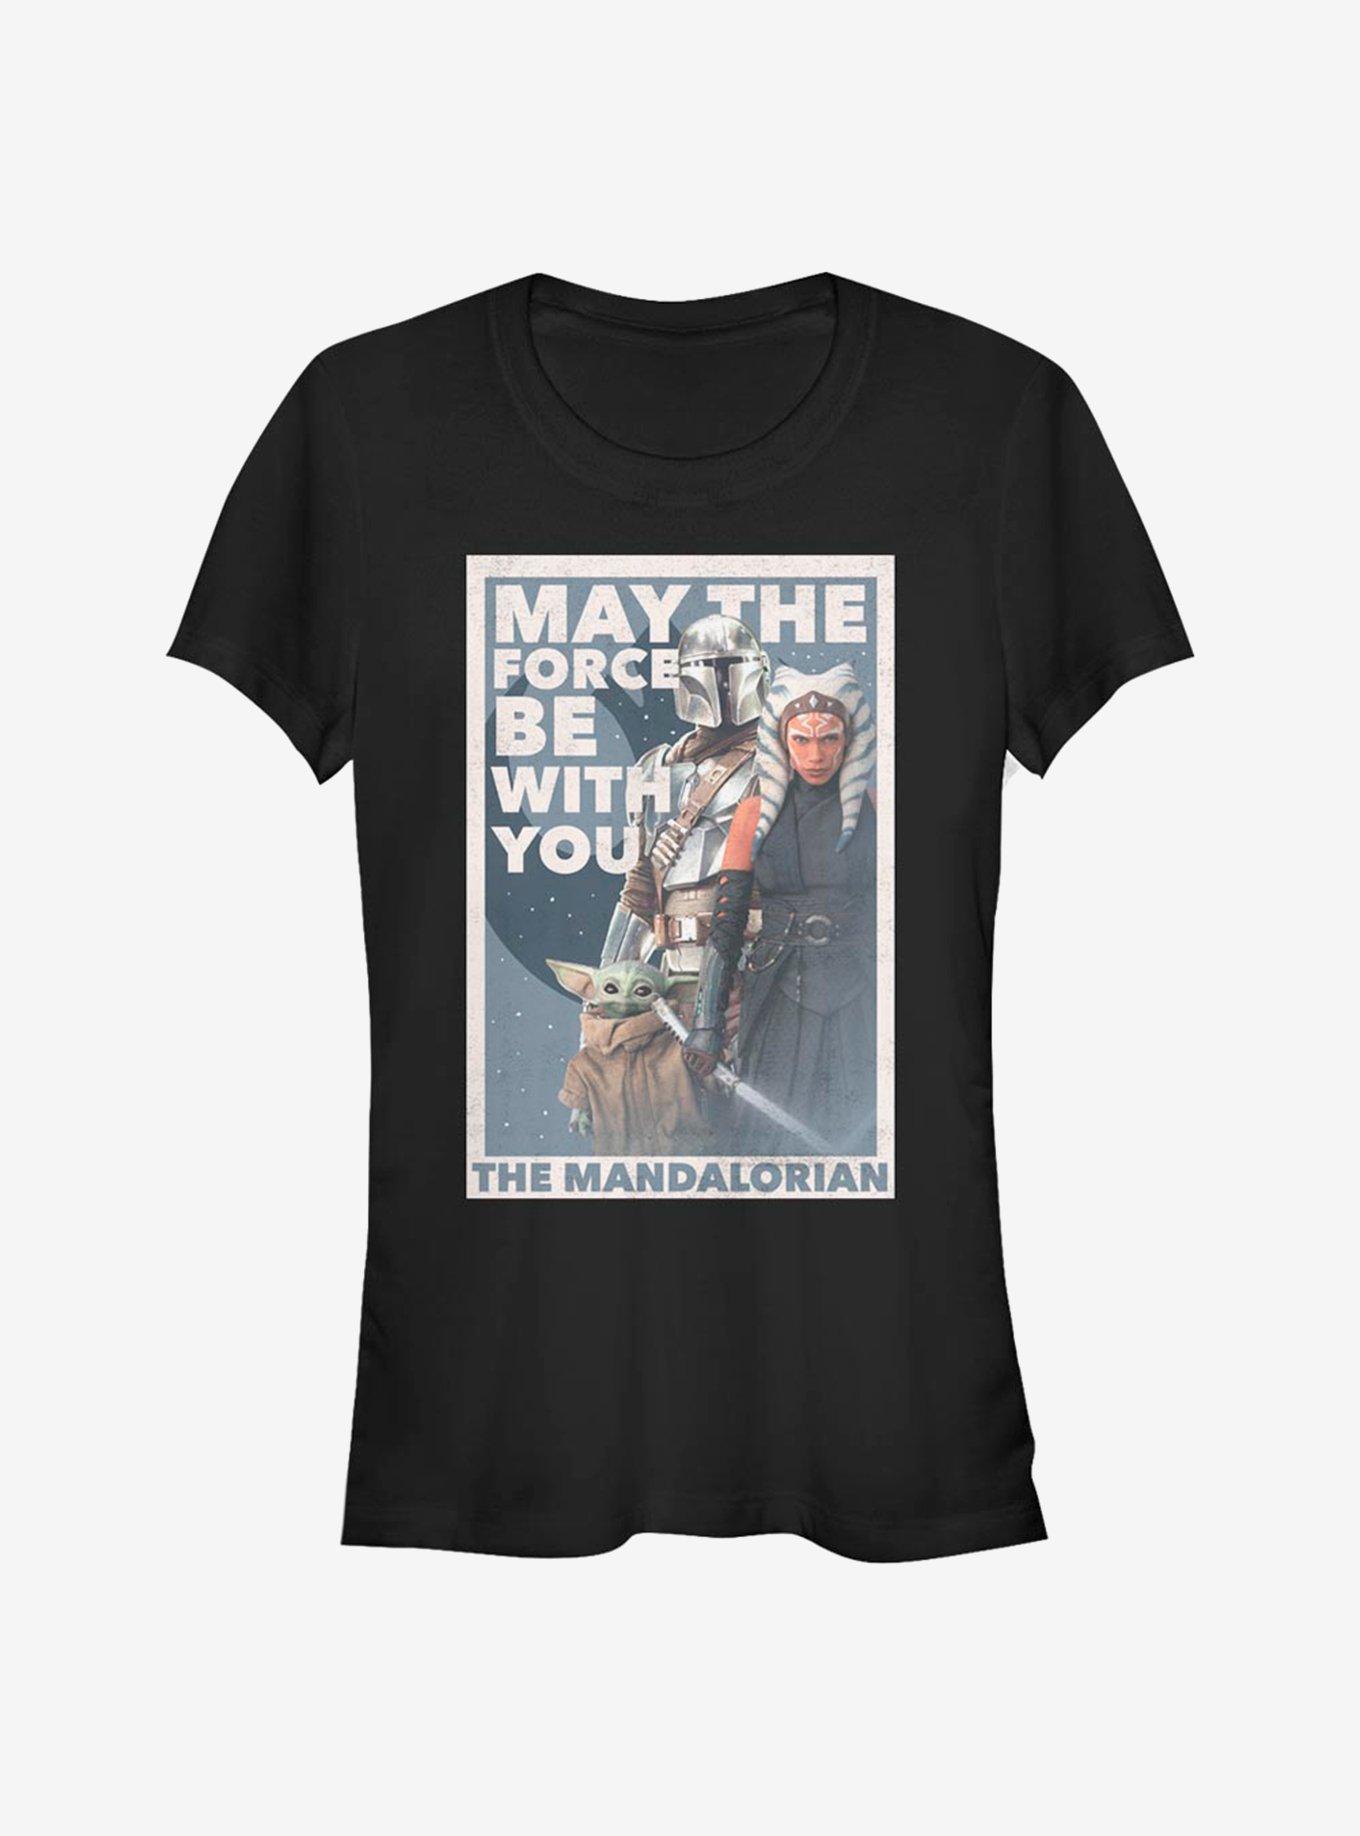 Star Wars The Mandalorian May The Force Be With You Girls T-Shirt, BLACK, hi-res